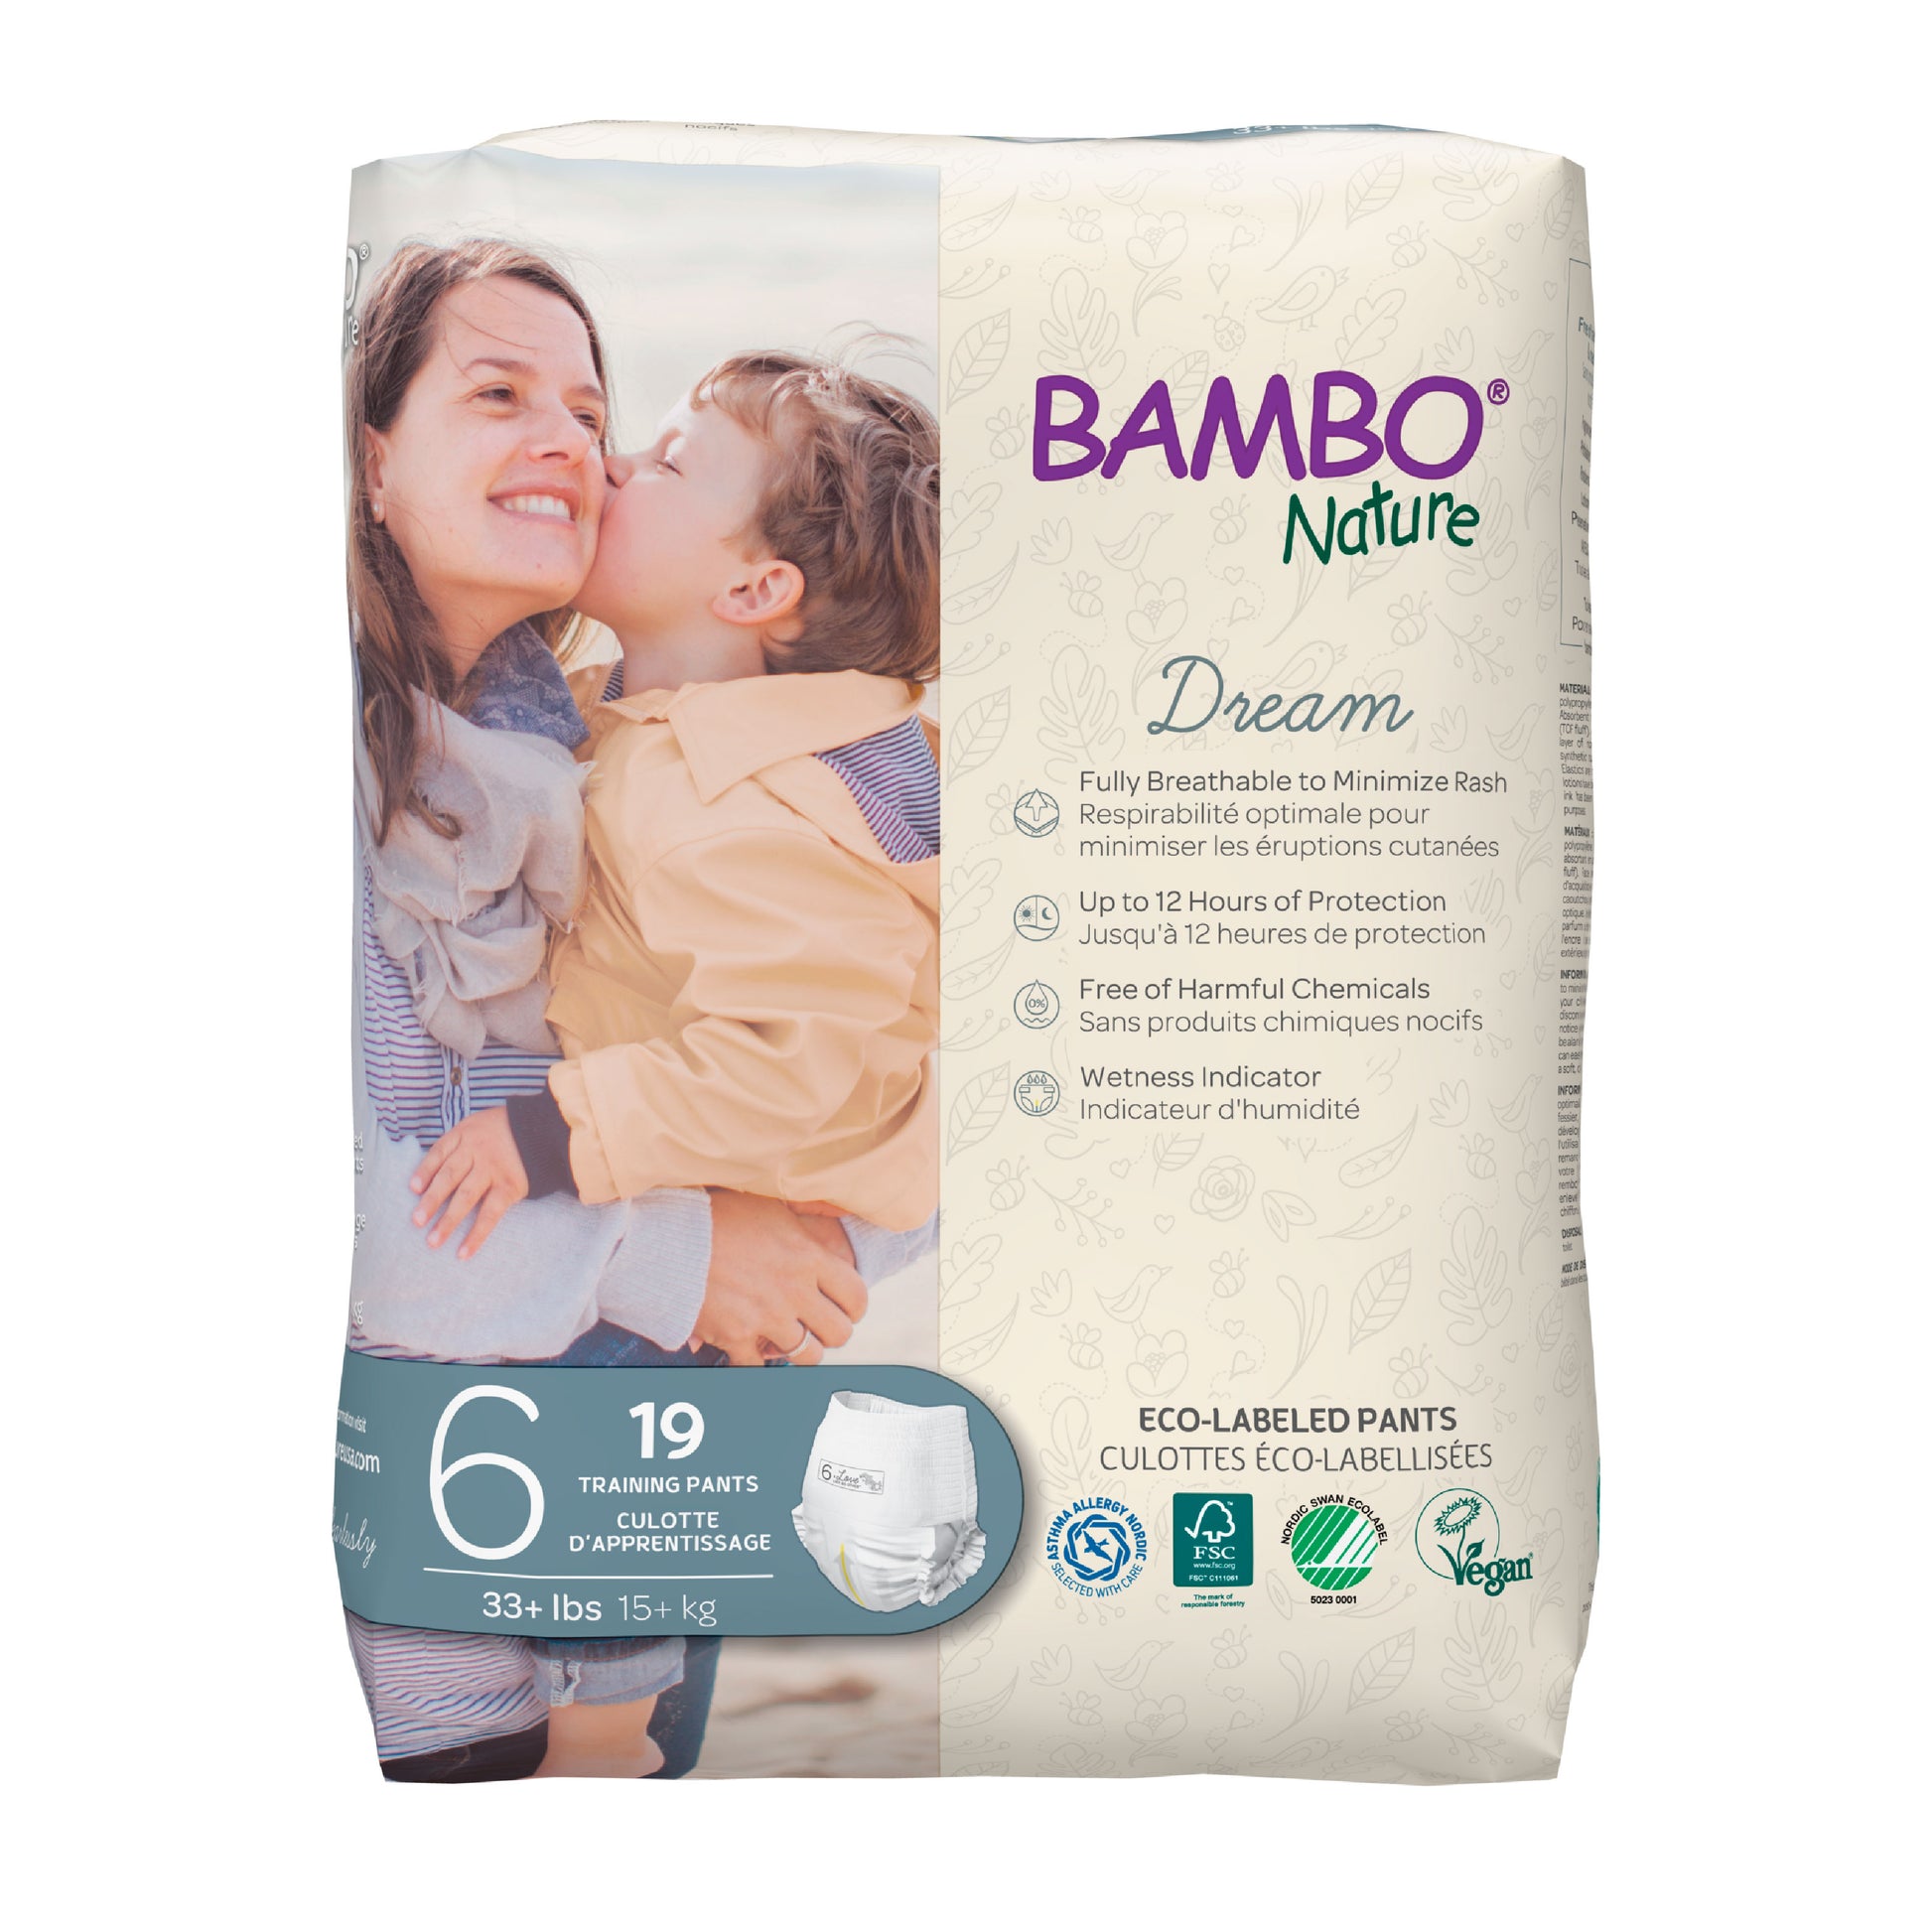  Bambo Nature Premium Training Pants (SIZES 4 TO 6 AVAILABLE),  Size 5, 20 Count : Baby